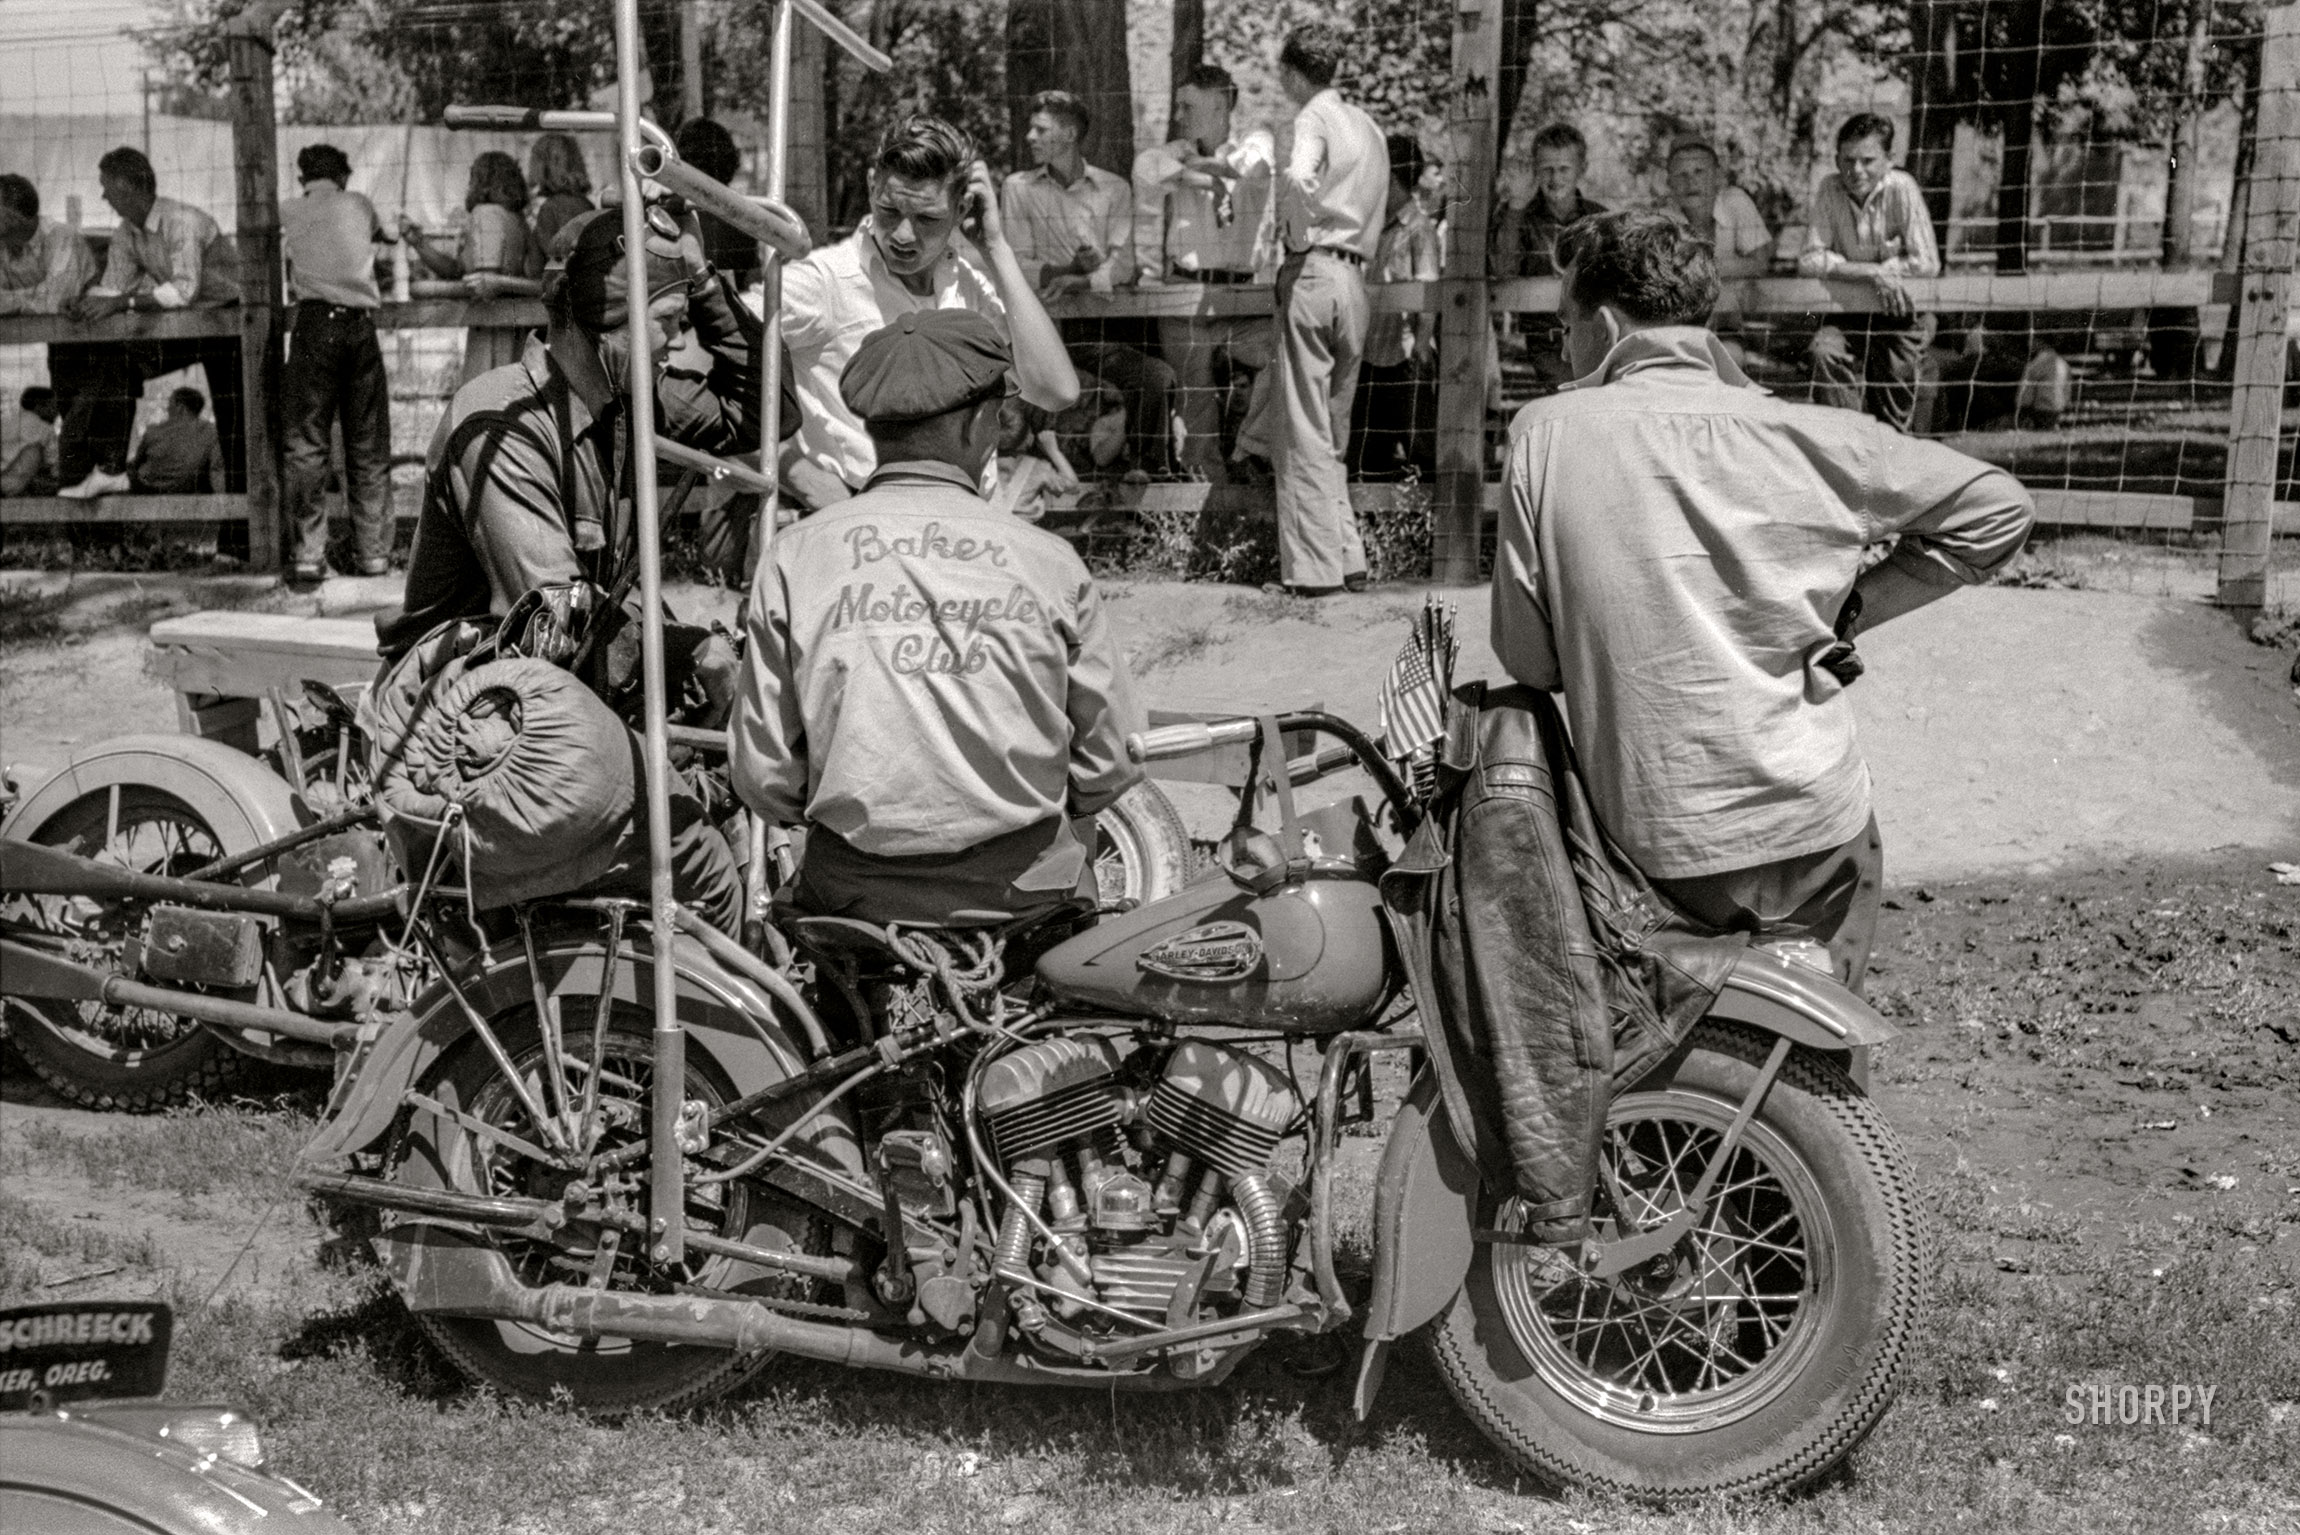 July 1941. "Motorcycle racers, Fourth of July, Vale, Oregon." Members of the Baker Motorcycle Club, last seen here. 35mm acetate negative by Russell Lee. View full size.